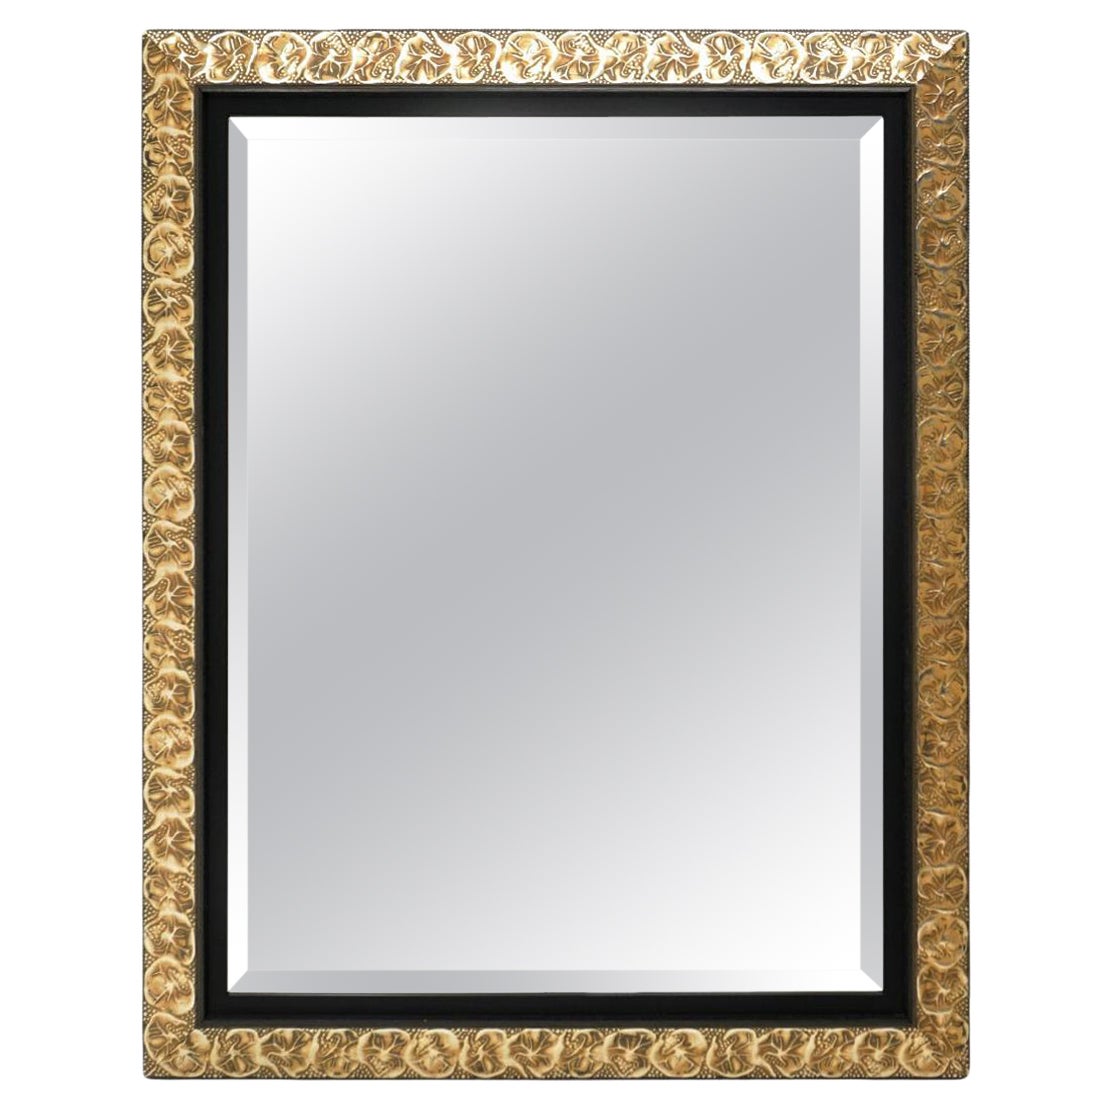 Beveled Repoussé Wall Mirror. Reverse Hammered Anodized Aluminum Frame For Sale